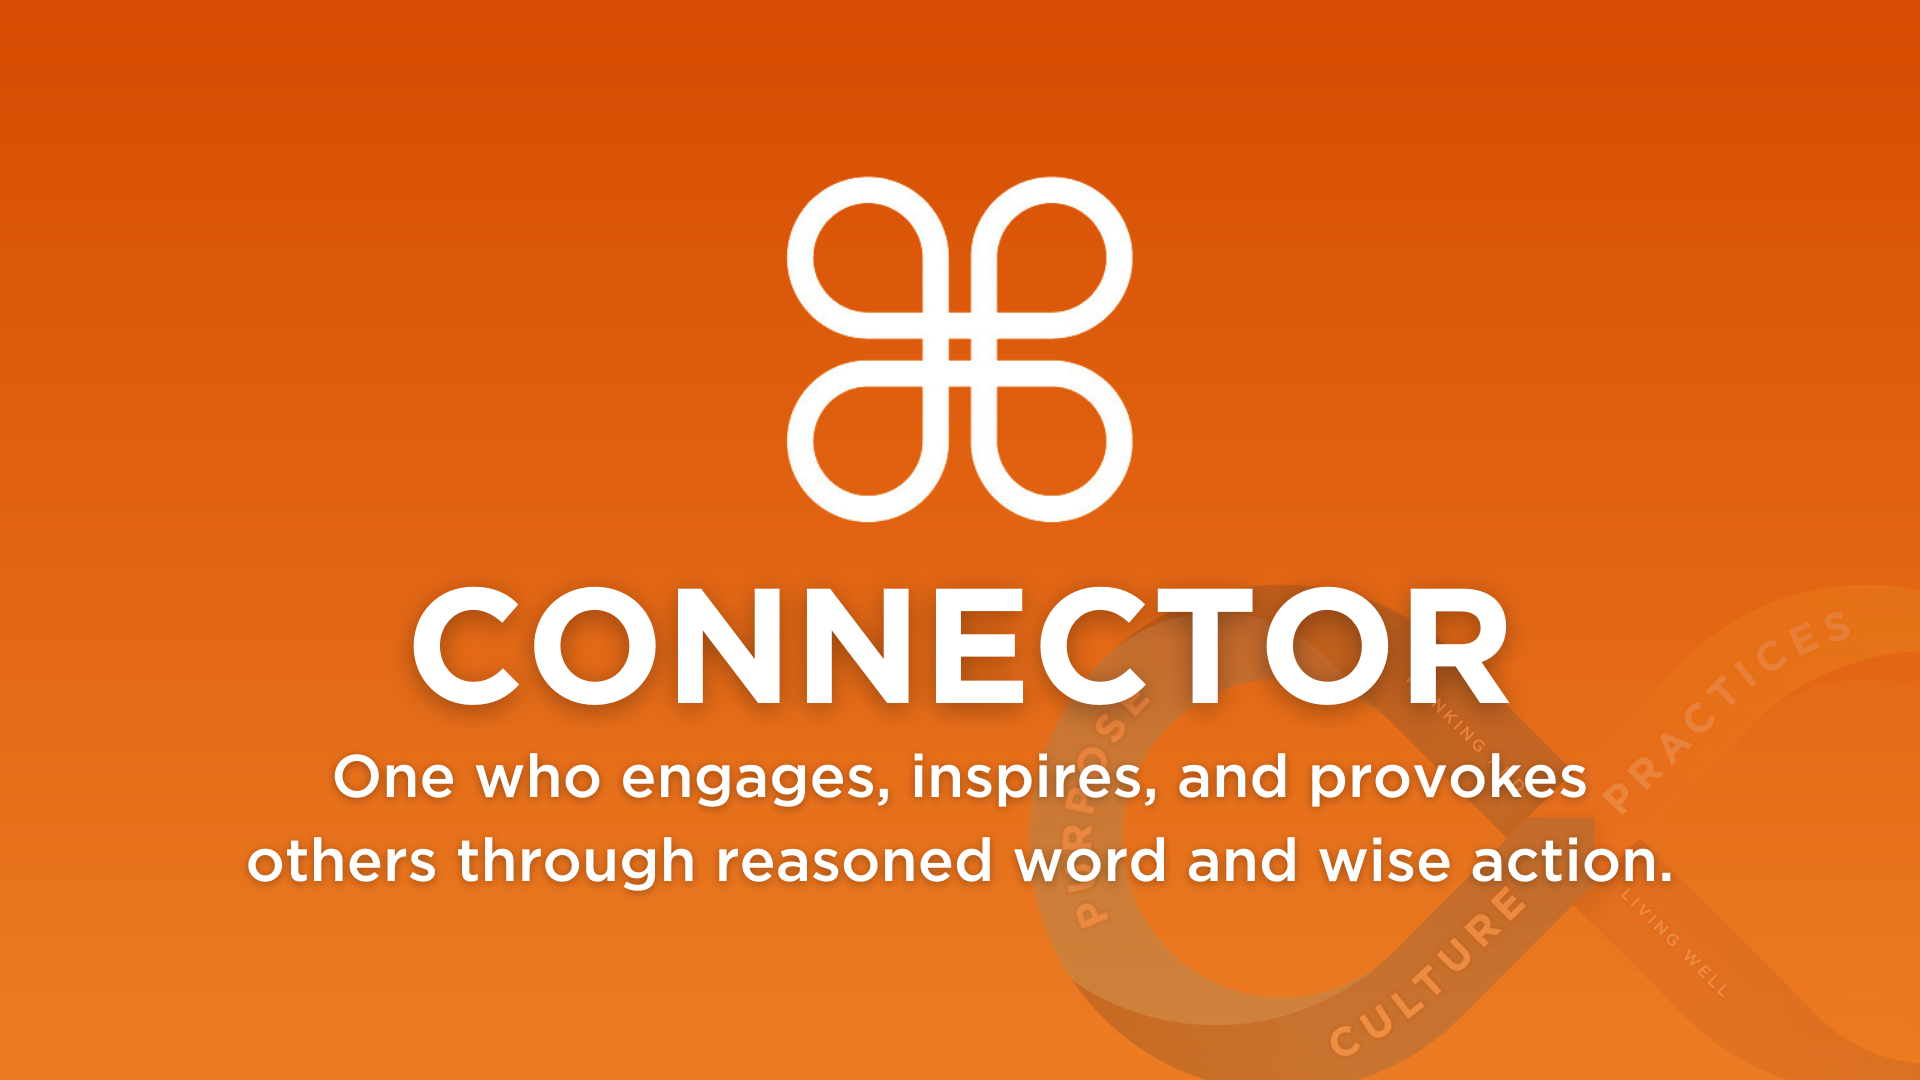 graphic for Connector - One who engages, inspires, and provokes others through reasoned word and wise action.